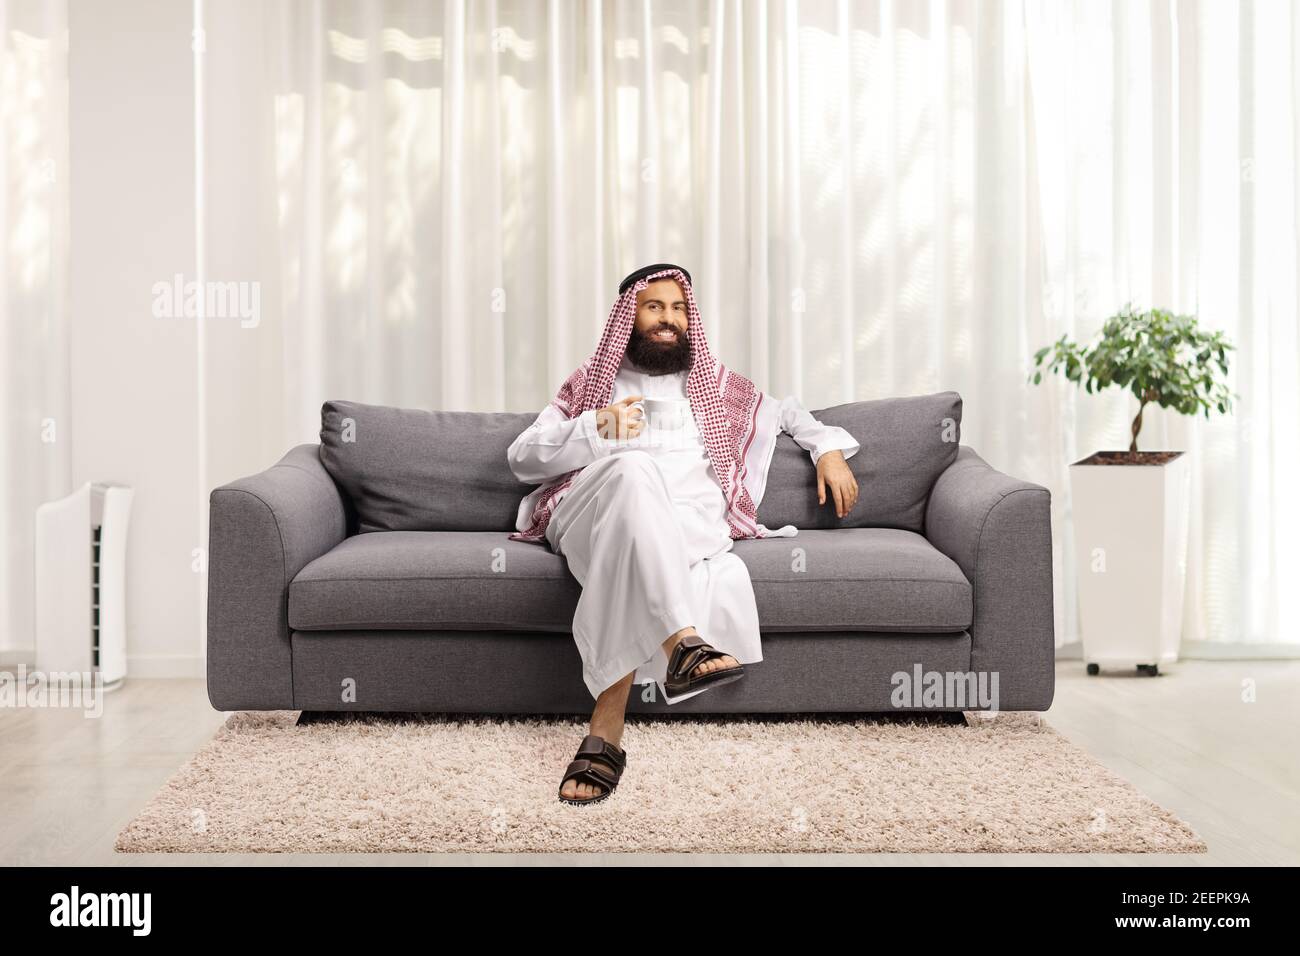 Saudi arab man sitting on a sofa at home and holding a cup of tea Stock Photo